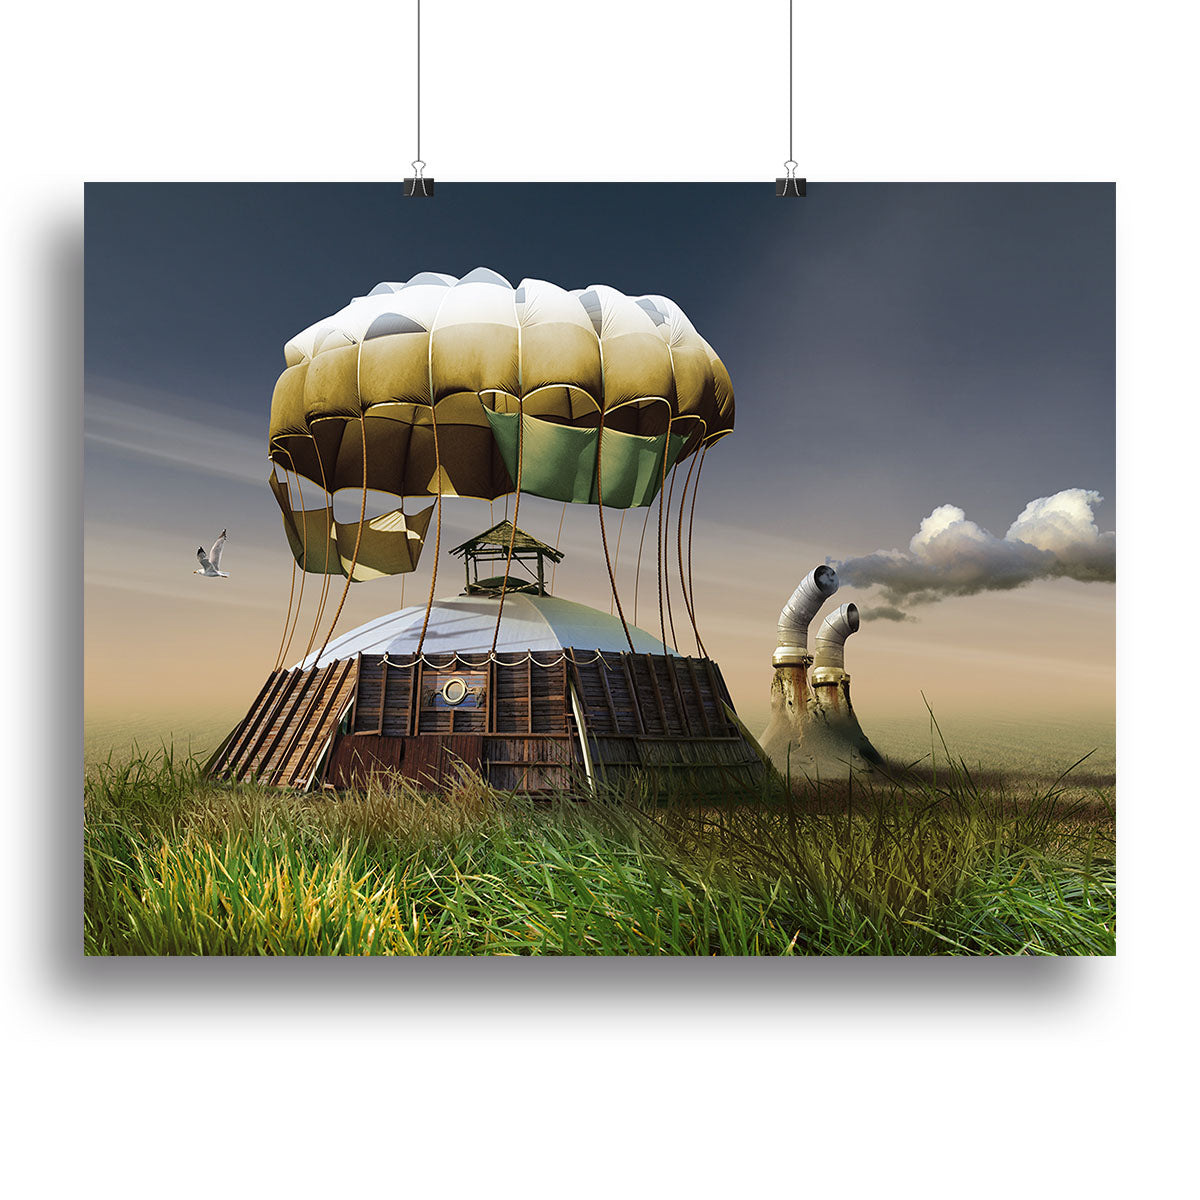 The home Canvas Print or Poster - 1x - 2